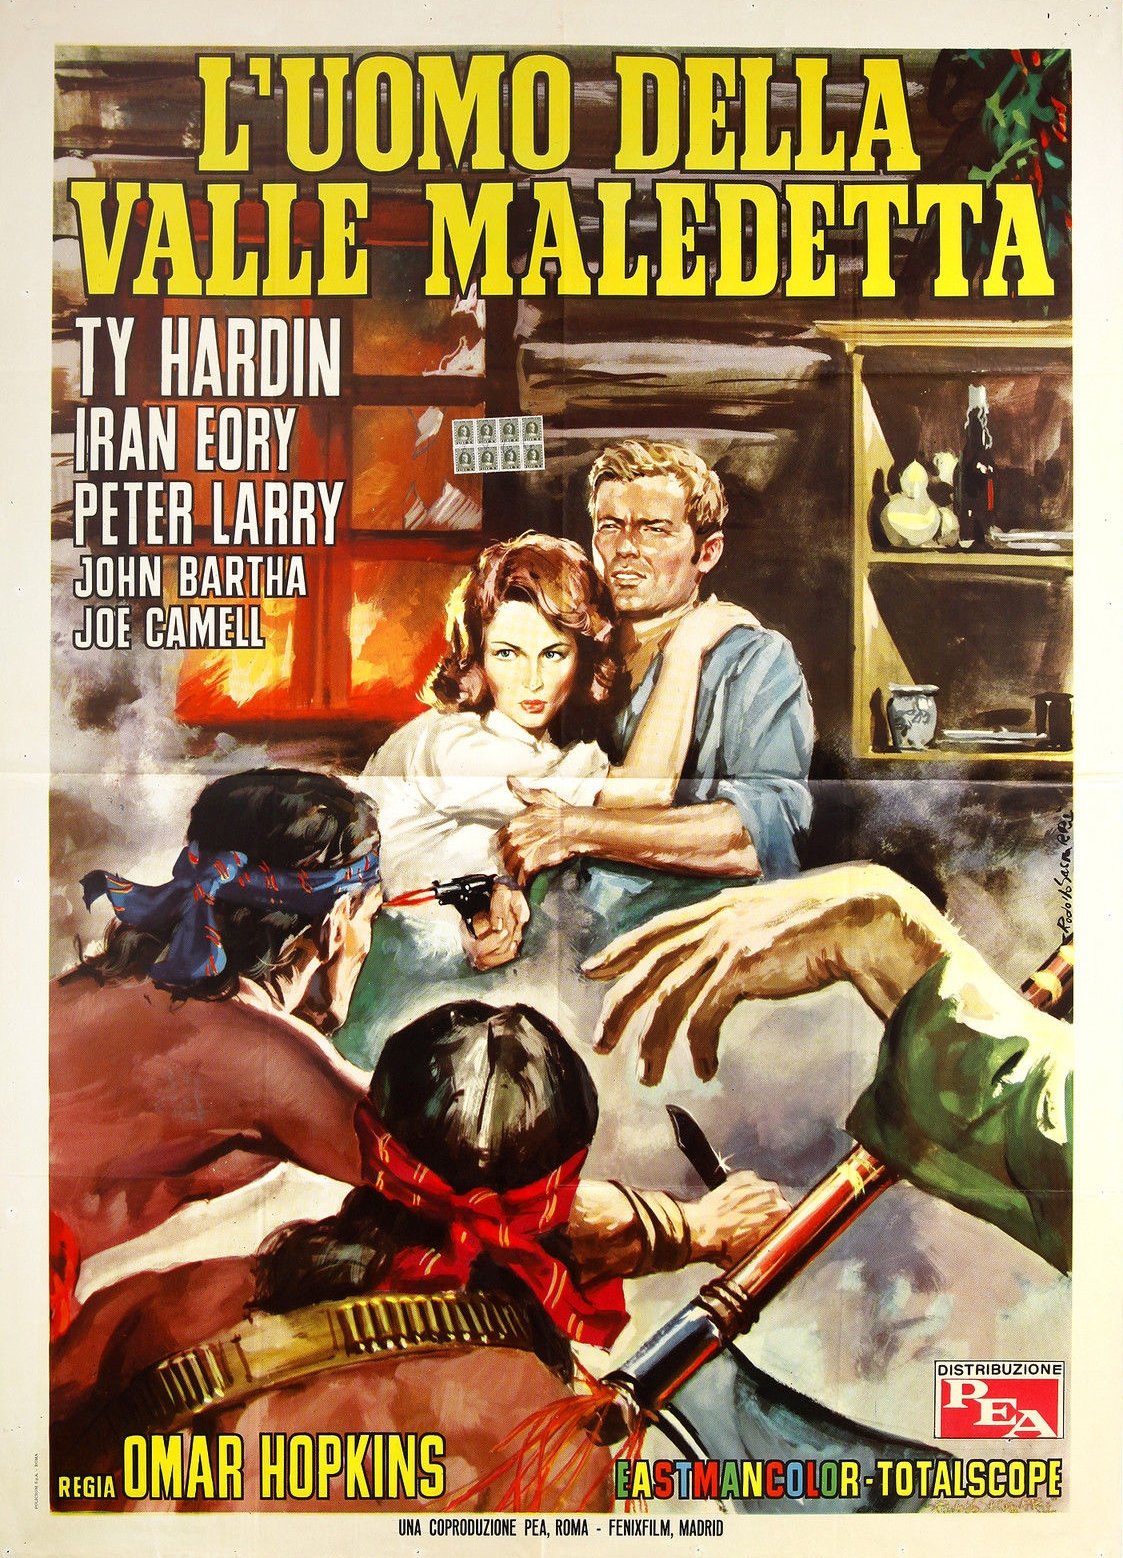 Man of the Cursed Valley (1964) Screenshot 1